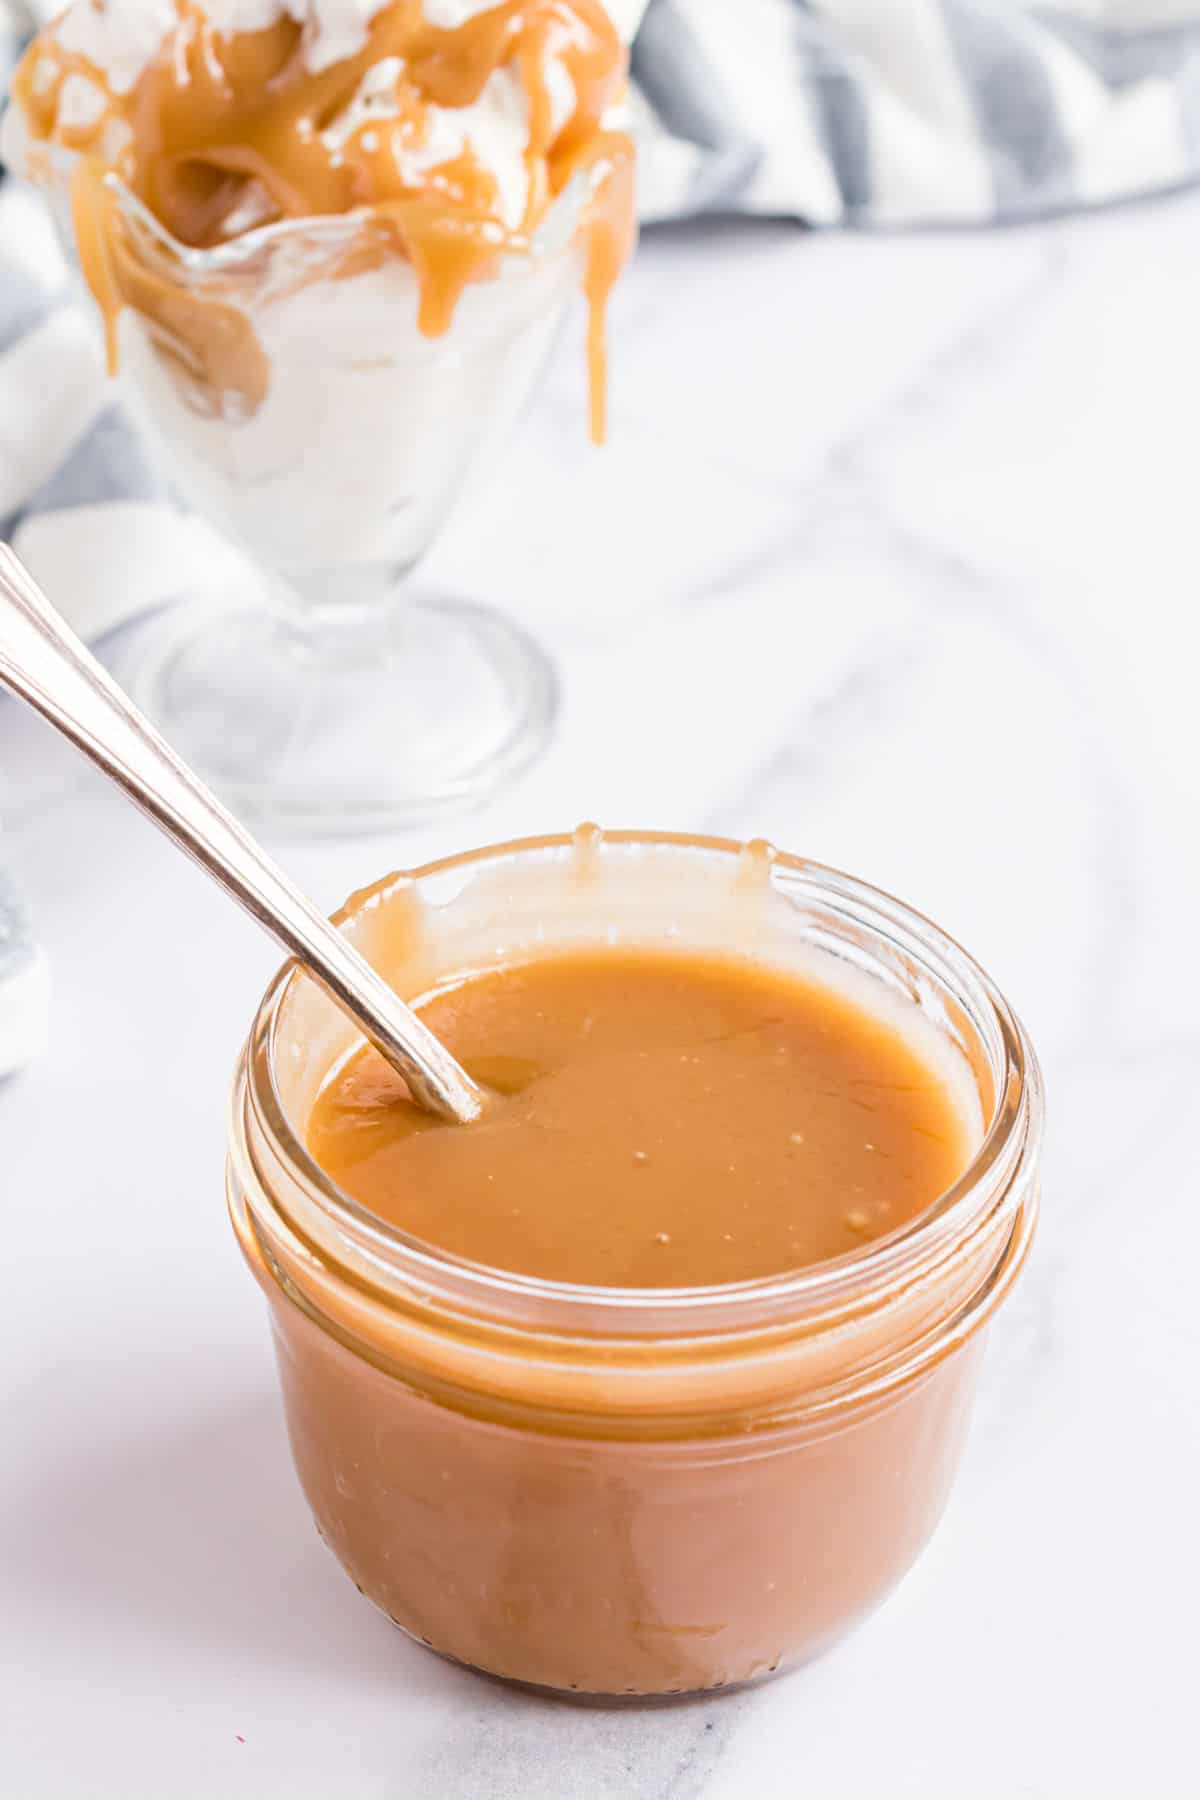 Butterscotch sauce in a jar with a spoon.